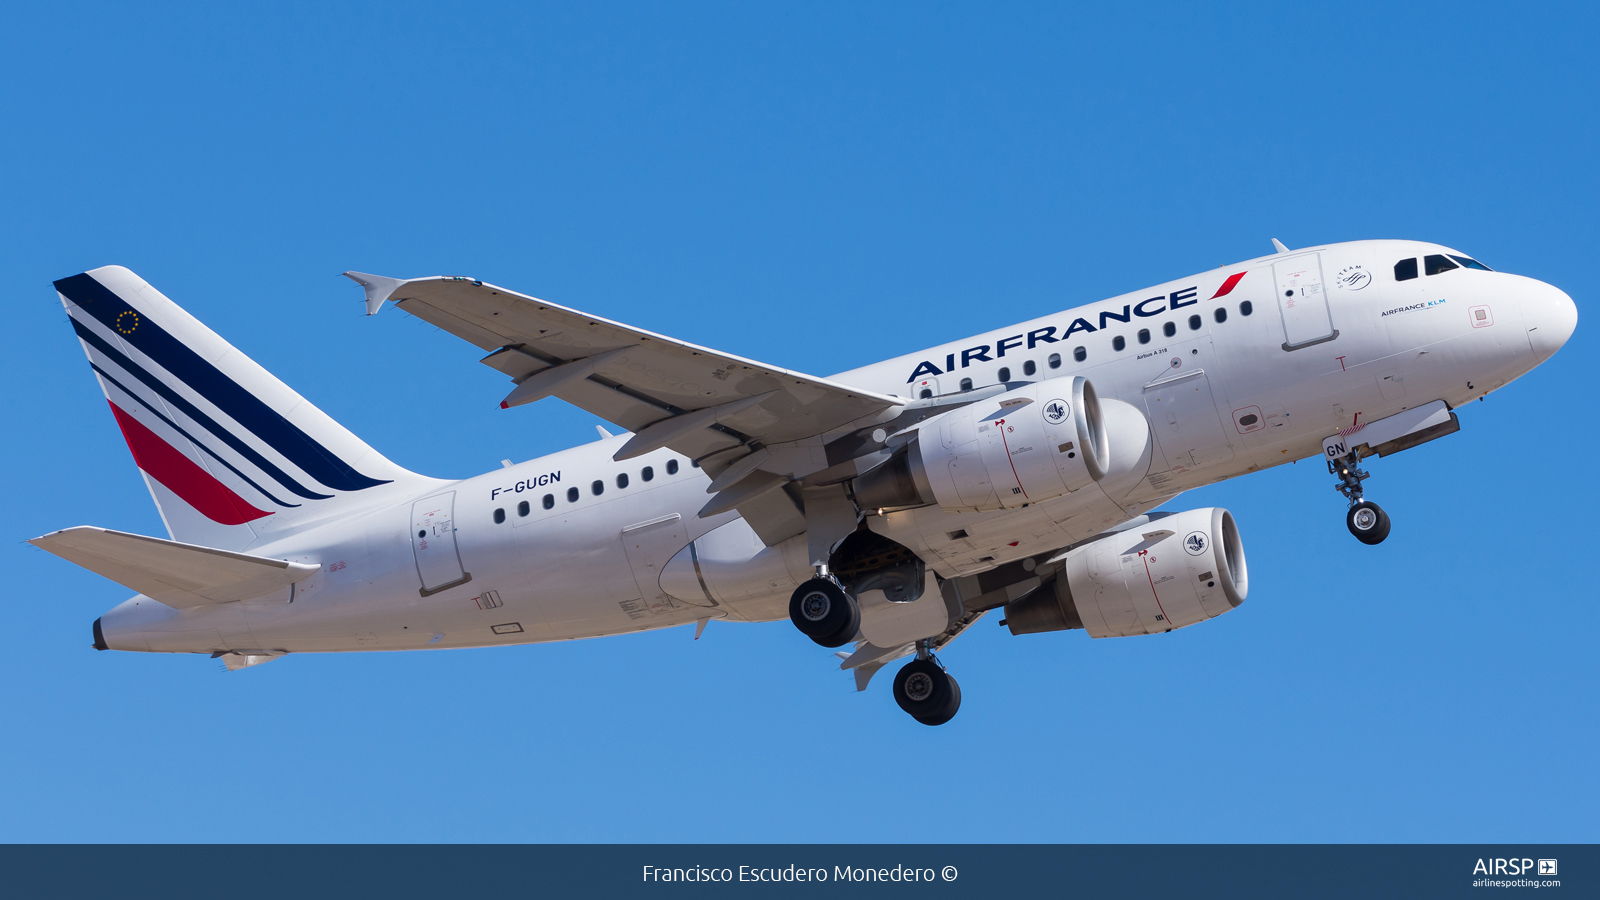 Air France  Airbus A318  F-GUGN